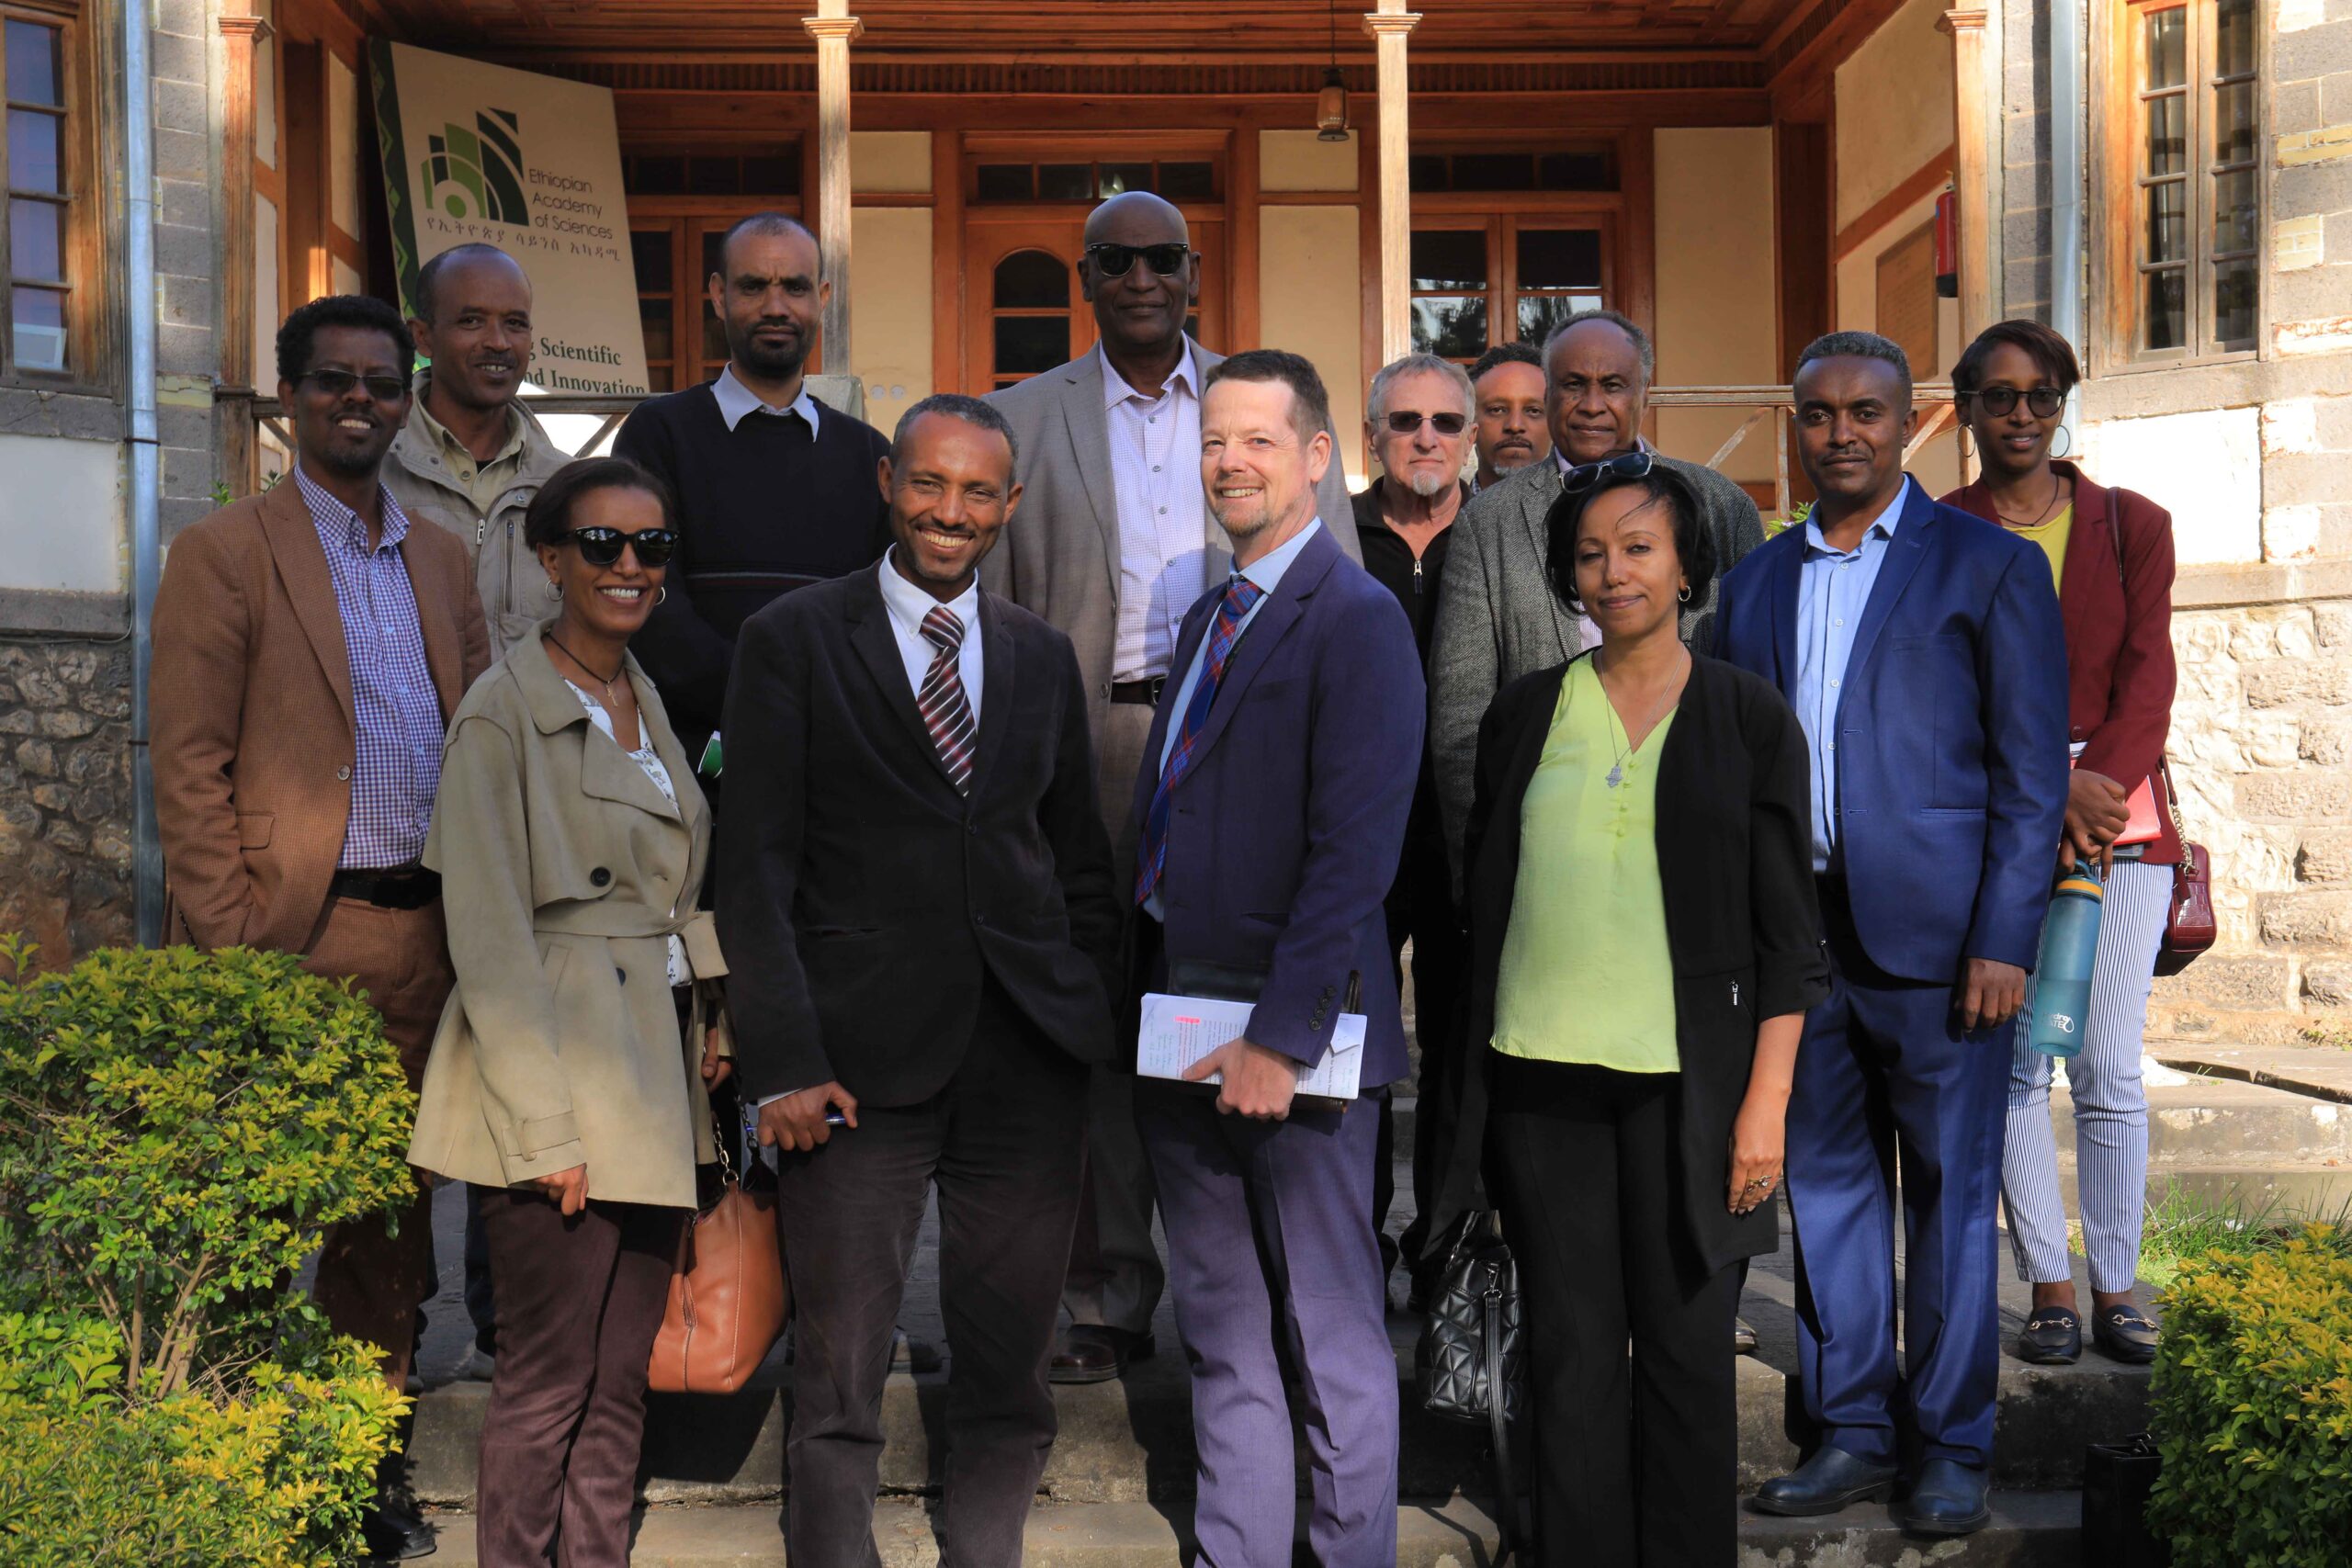 The U.S. Embassy in Addis Ababa, Education and Culture exchange team visited the EAS Headquarters to discuss possible partnerships